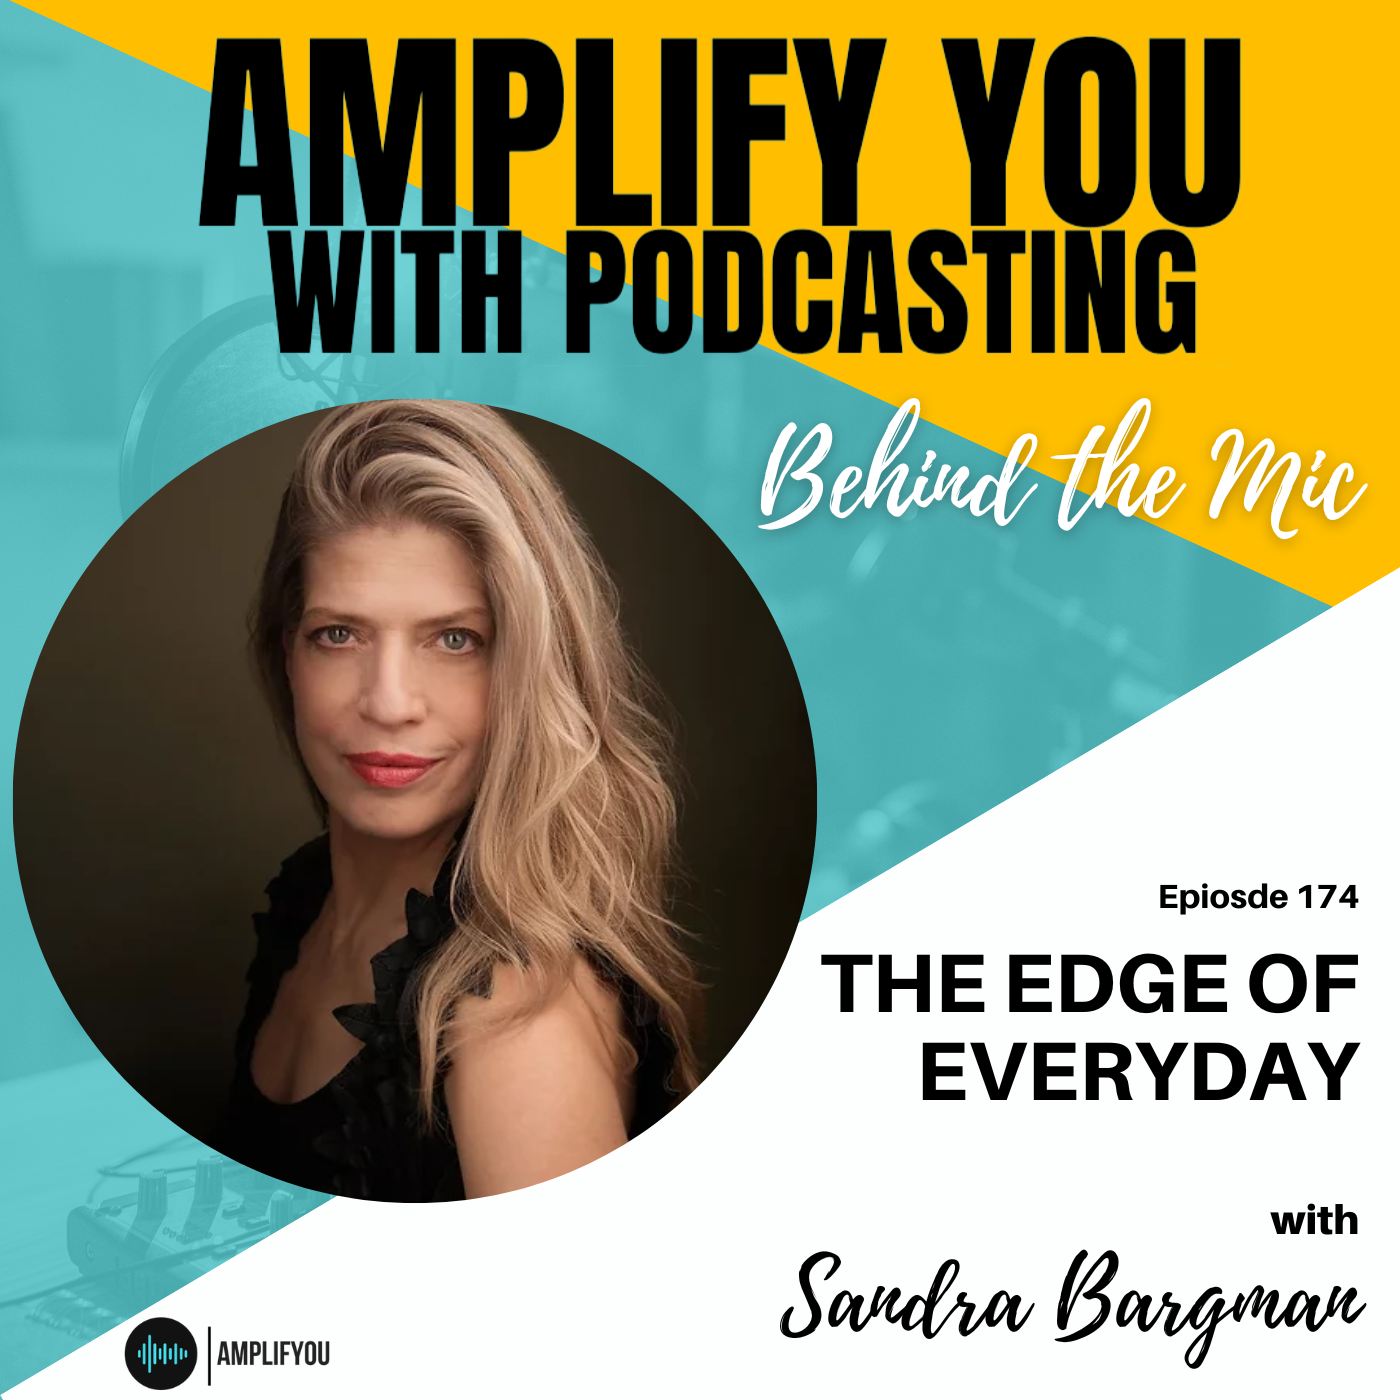 Behind the Mic: The Edge of Everyday with Sandra Bargman